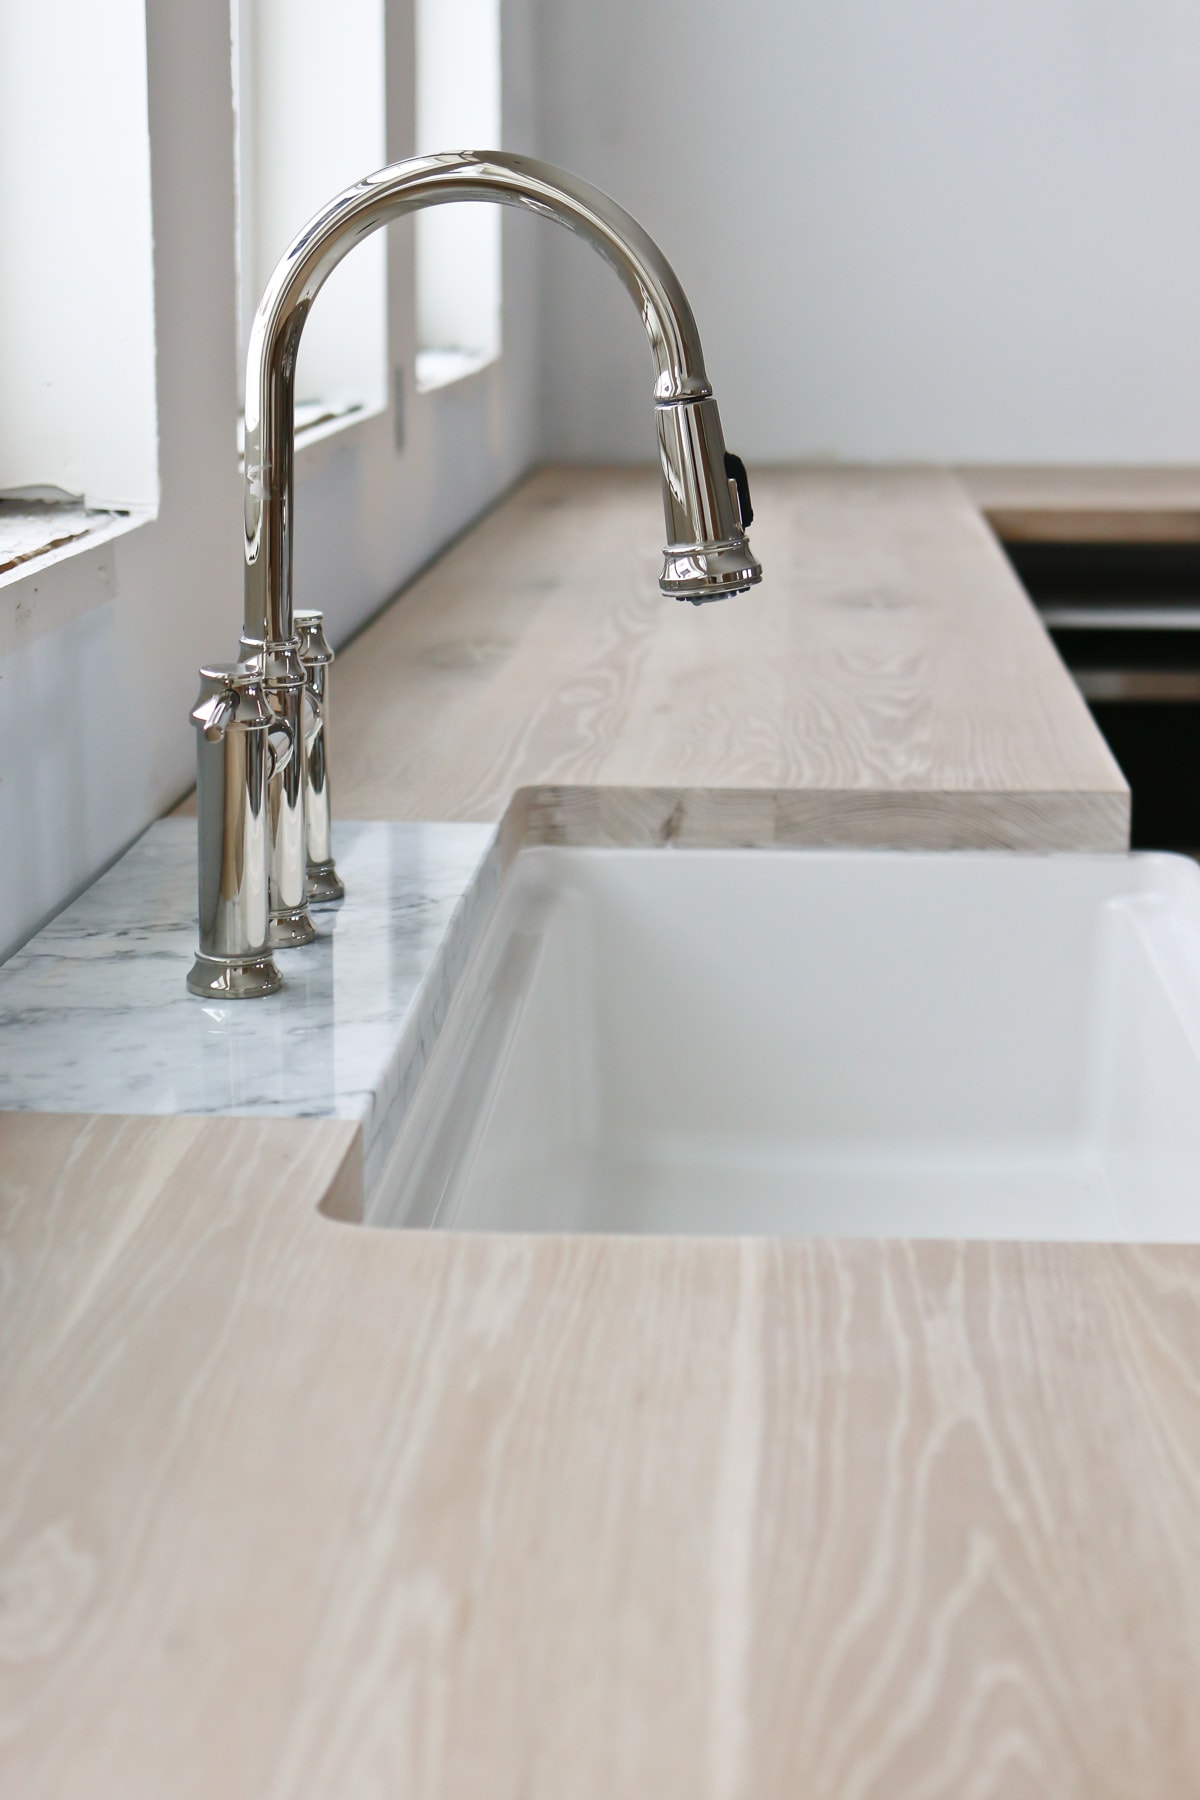 Diy Butcher Block Countertops Oh Yes, How To Make Butcher Block Countertops Durable